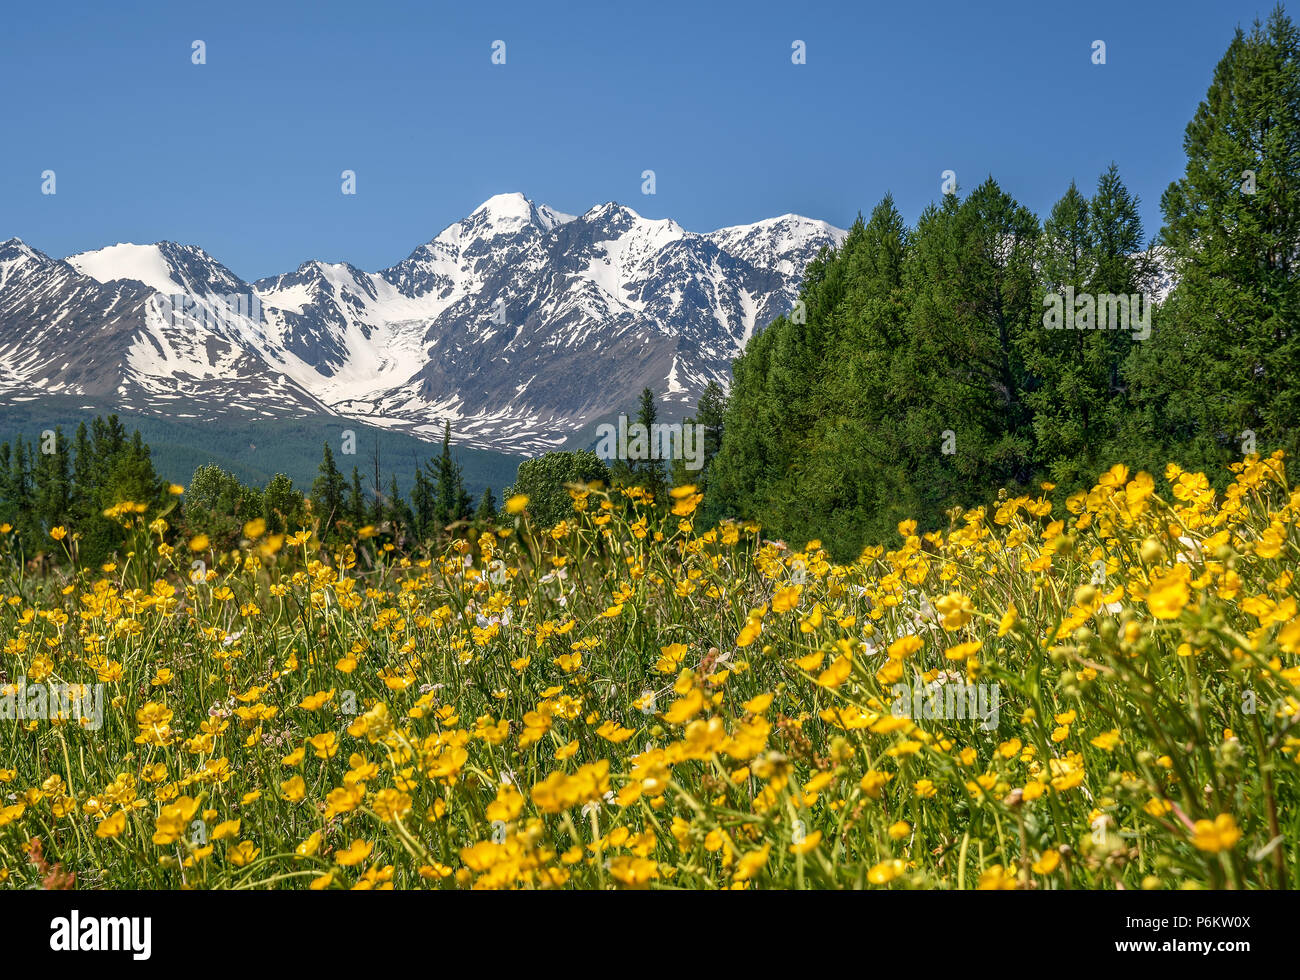 Amazing Landscape With Bright Yellow Flowers Of Buttercups On A Green